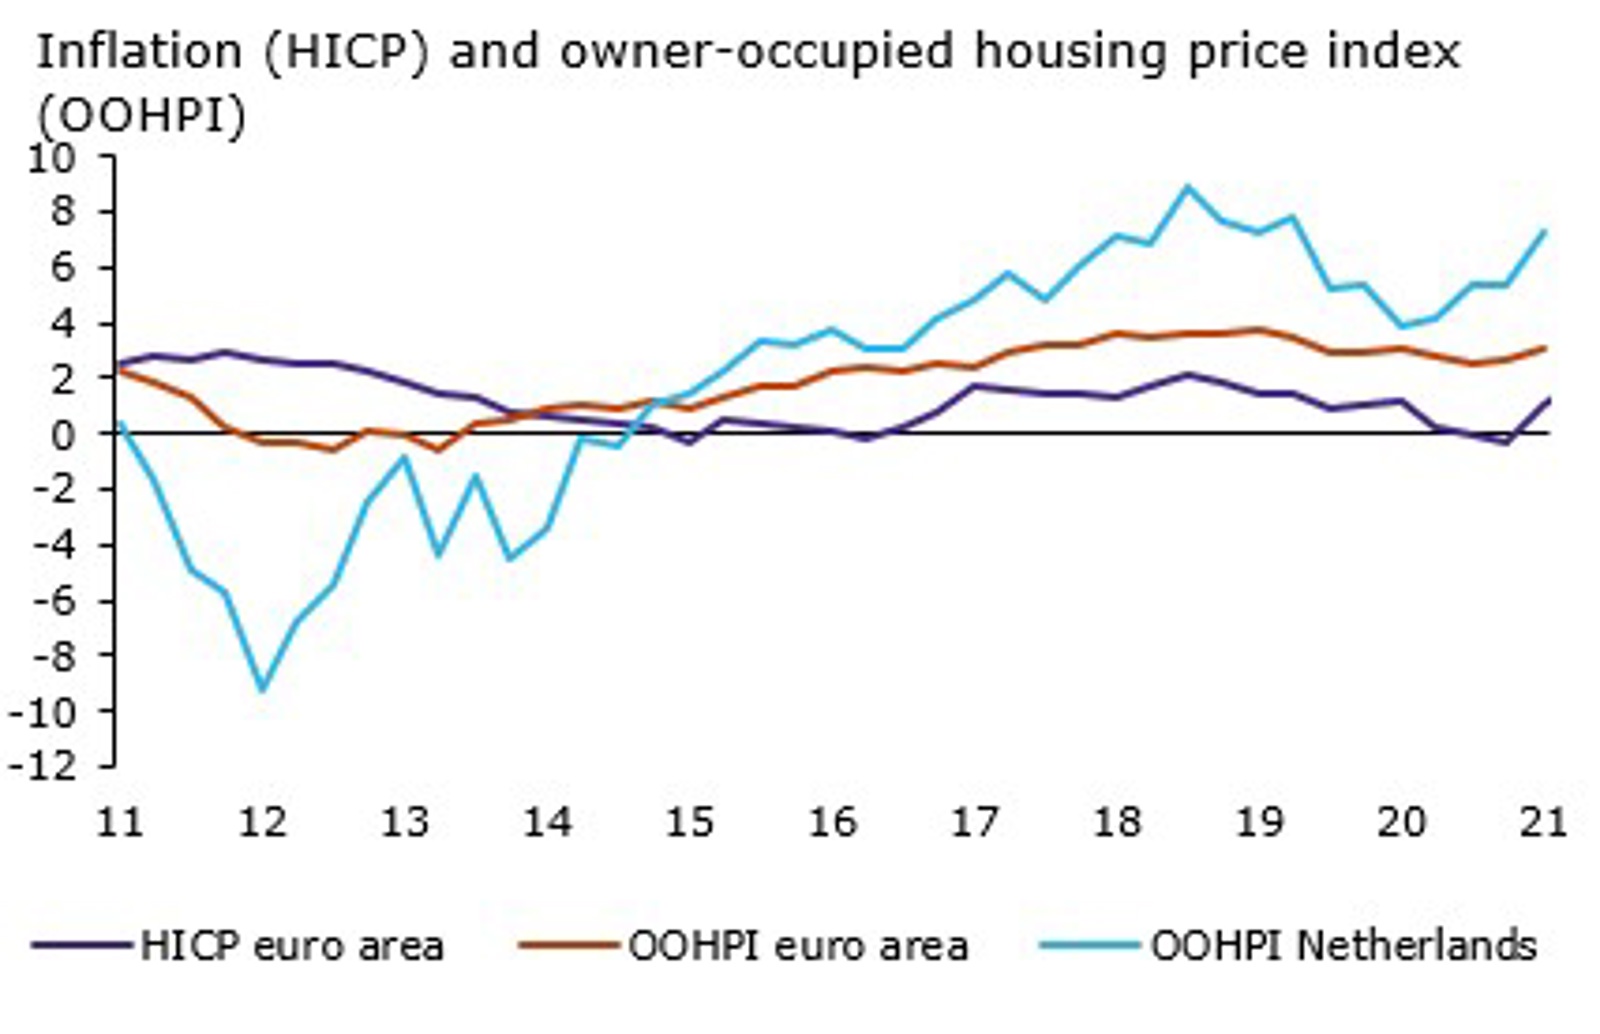 Inflation (HICP) and owner-occupied housing price index